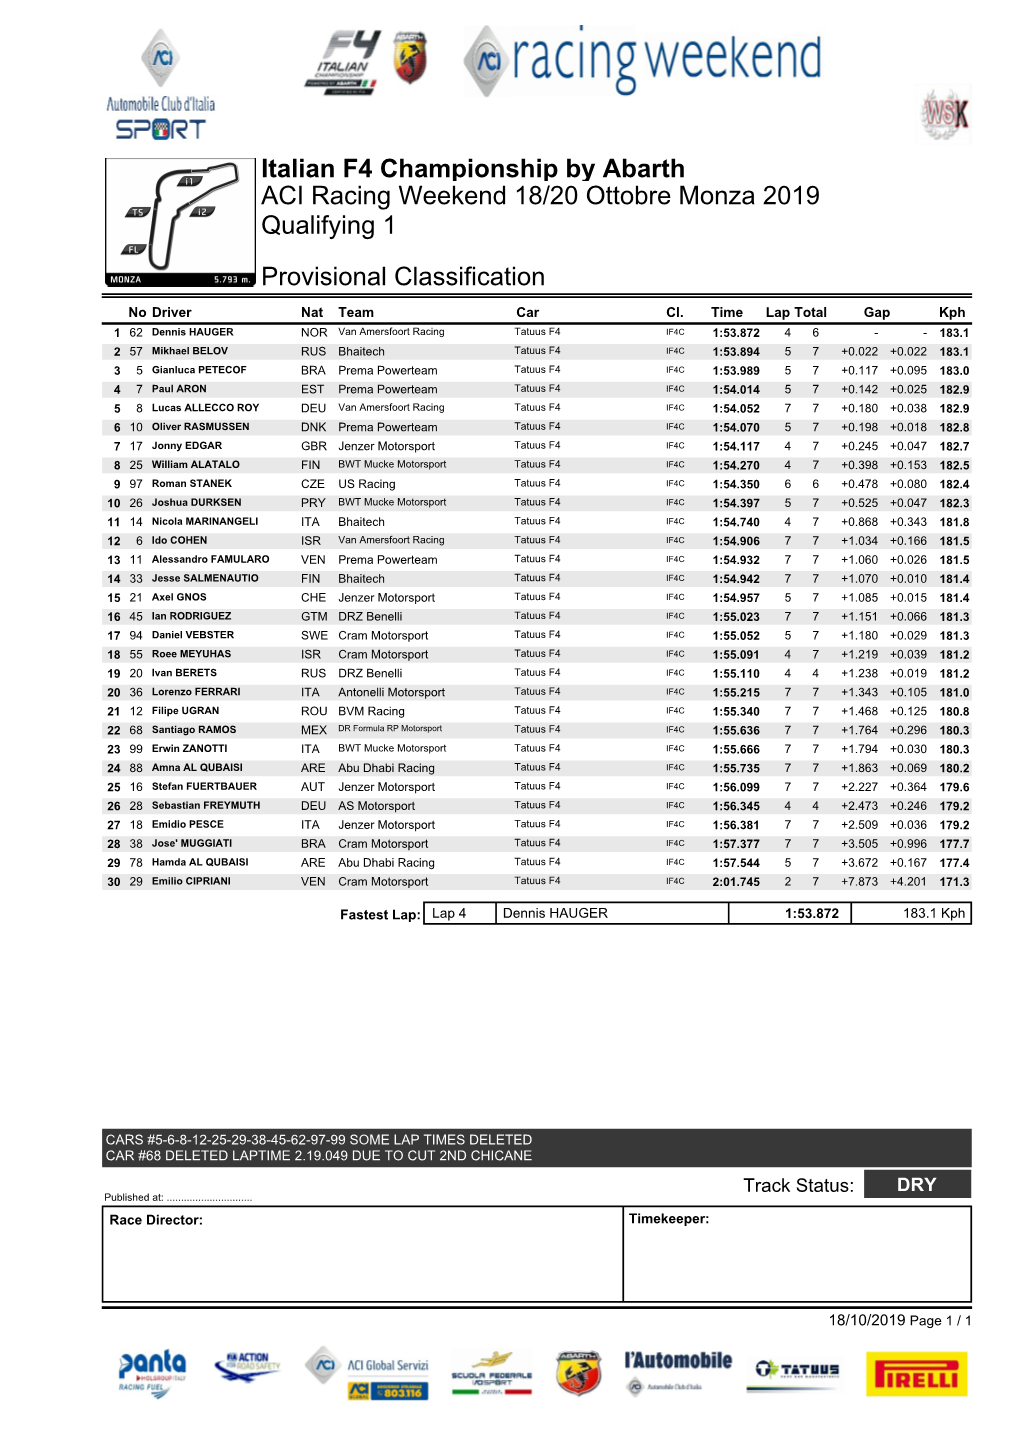 Italian F4 Championship by Abarth ACI Racing Weekend 18/20 Ottobre Monza 2019 Qualifying 1 Provisional Classification